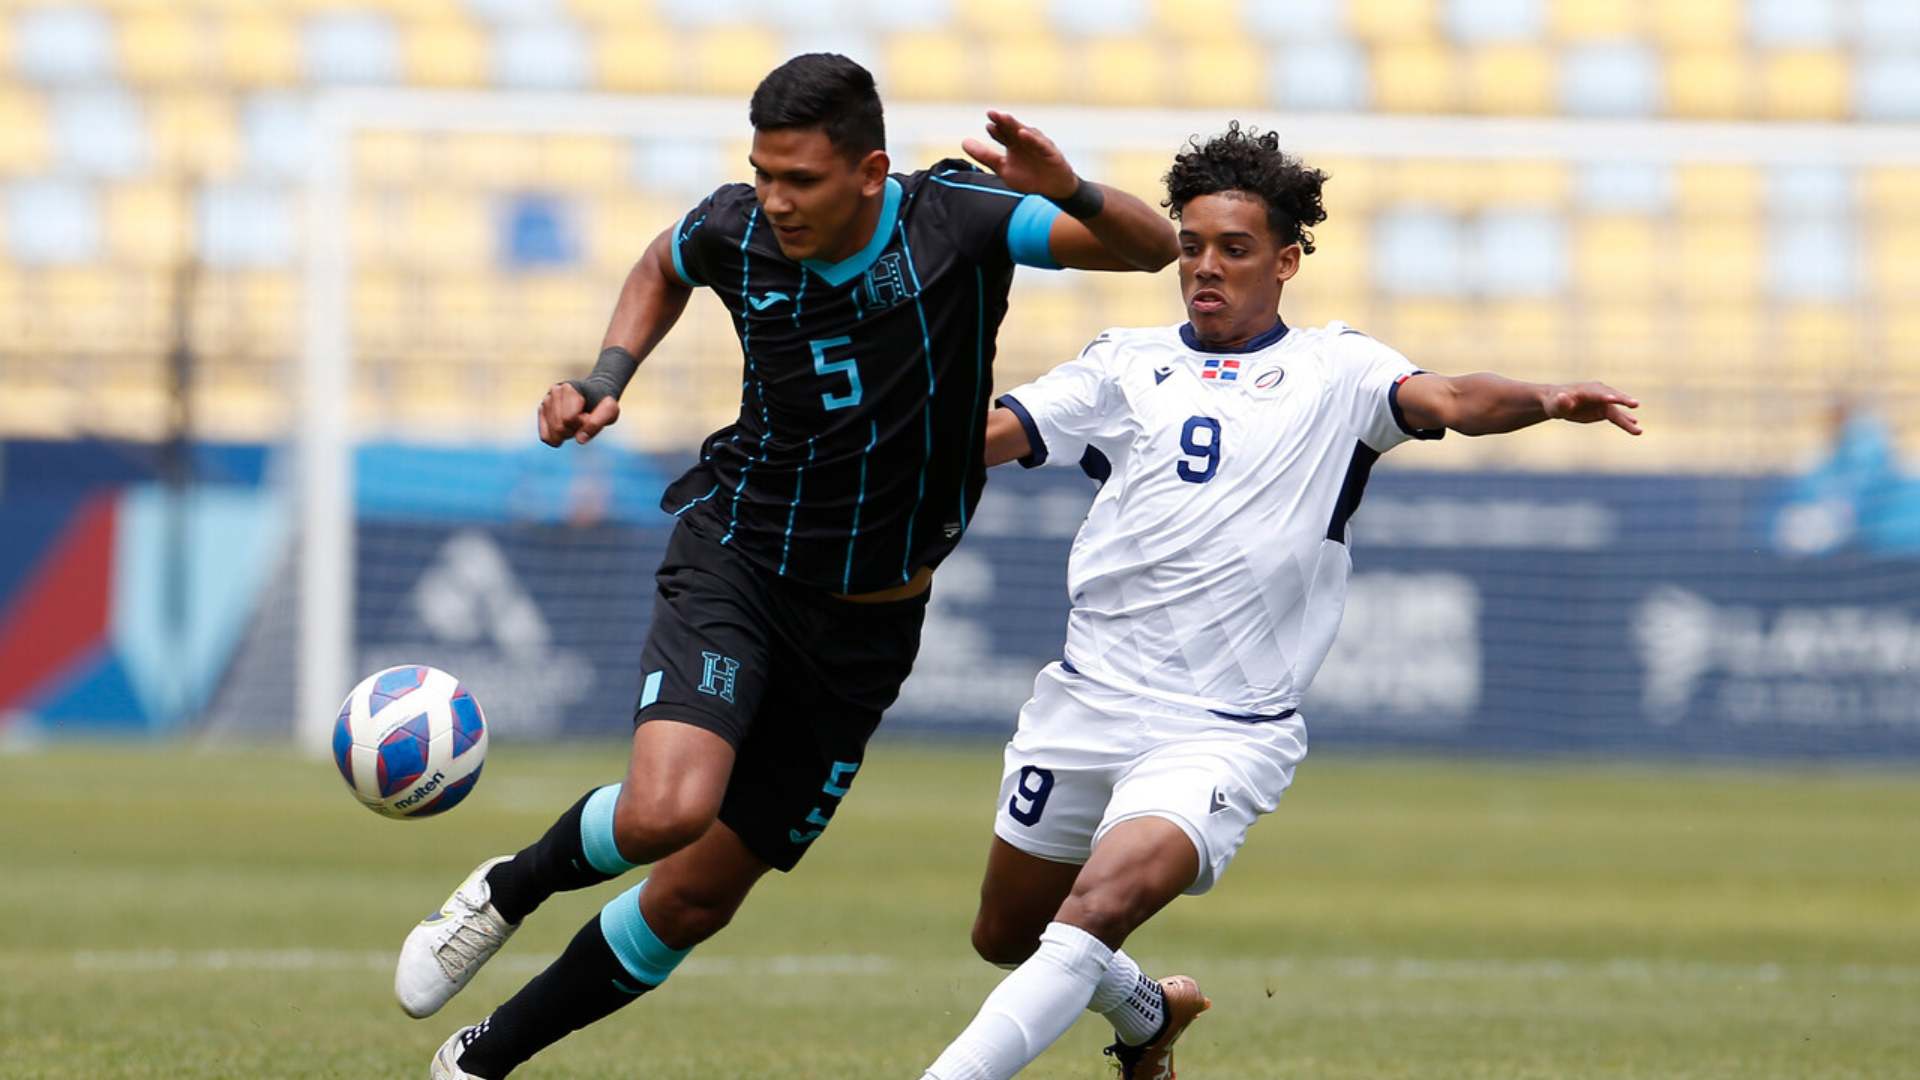 Honduras beats the Dominican Republic and finishes seventh in male's football